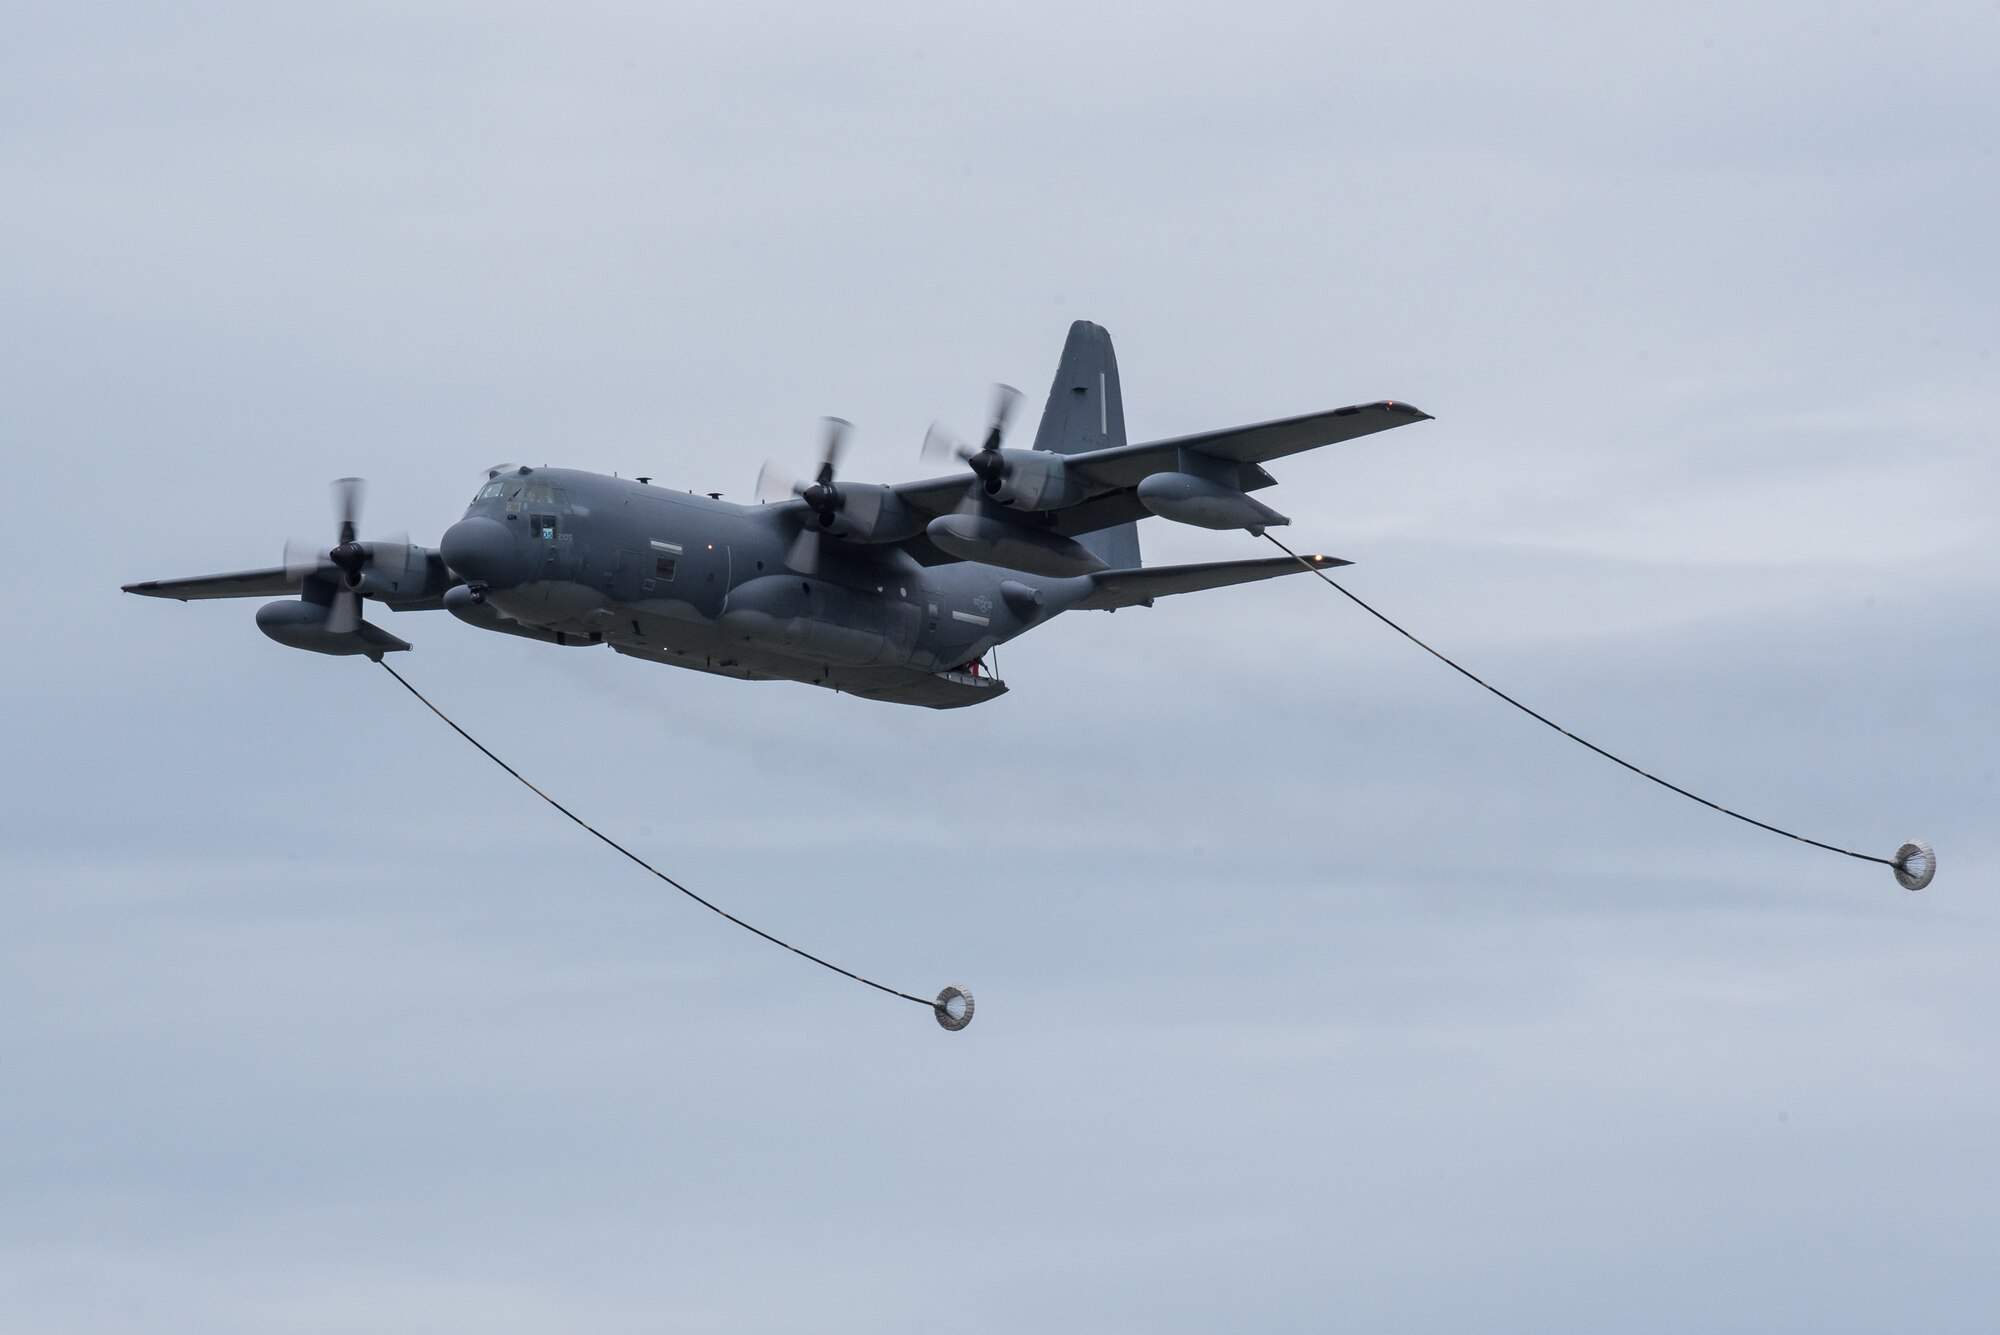 A U.S. Air Force HC-130 Hercules aircraft from Patrick Air Force Base Florida, deploys its refueling drogues over the Ohio River during the Thunder Over Louisville airshow in Louisville, Ky., April 13, 2019. The Kentucky Air National Guard once again served as the base of operations for military aircraft participating in the annual event, which has grown to become one of the largest single-day air shows in North America. (U.S. Air National Guard photo by Dale Greer)